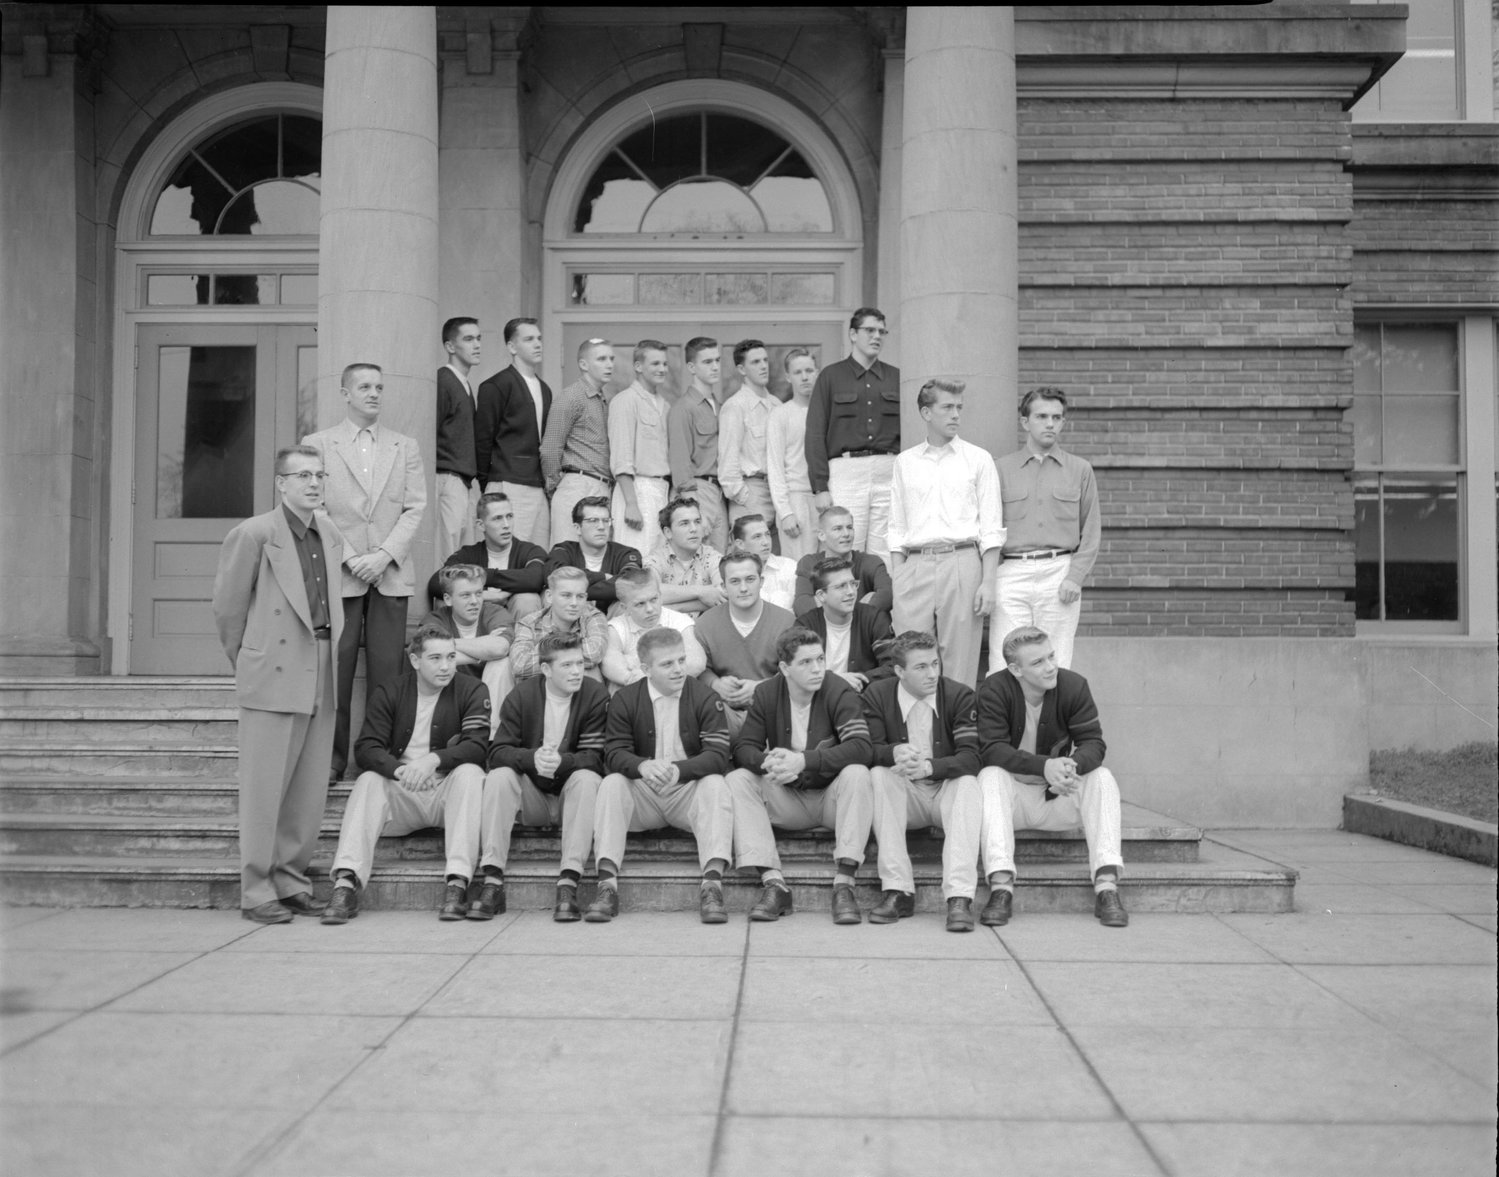 The 1954 Chehalis High School football team is pictured here.